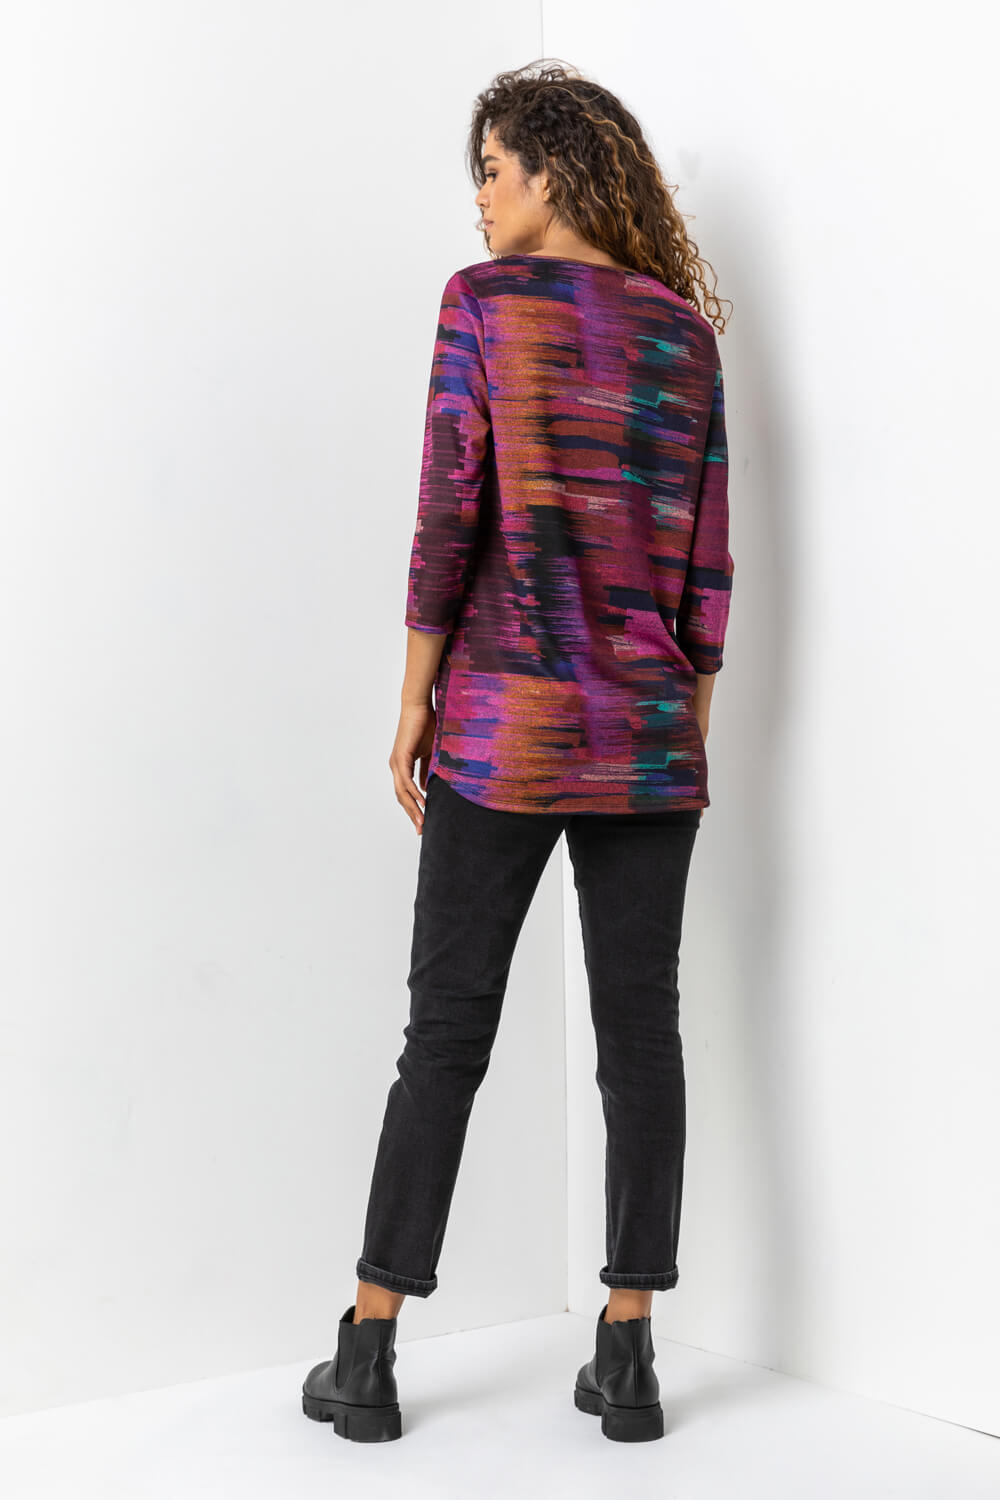 Purple Abstract Print Pocket Top with Snood, Image 2 of 4